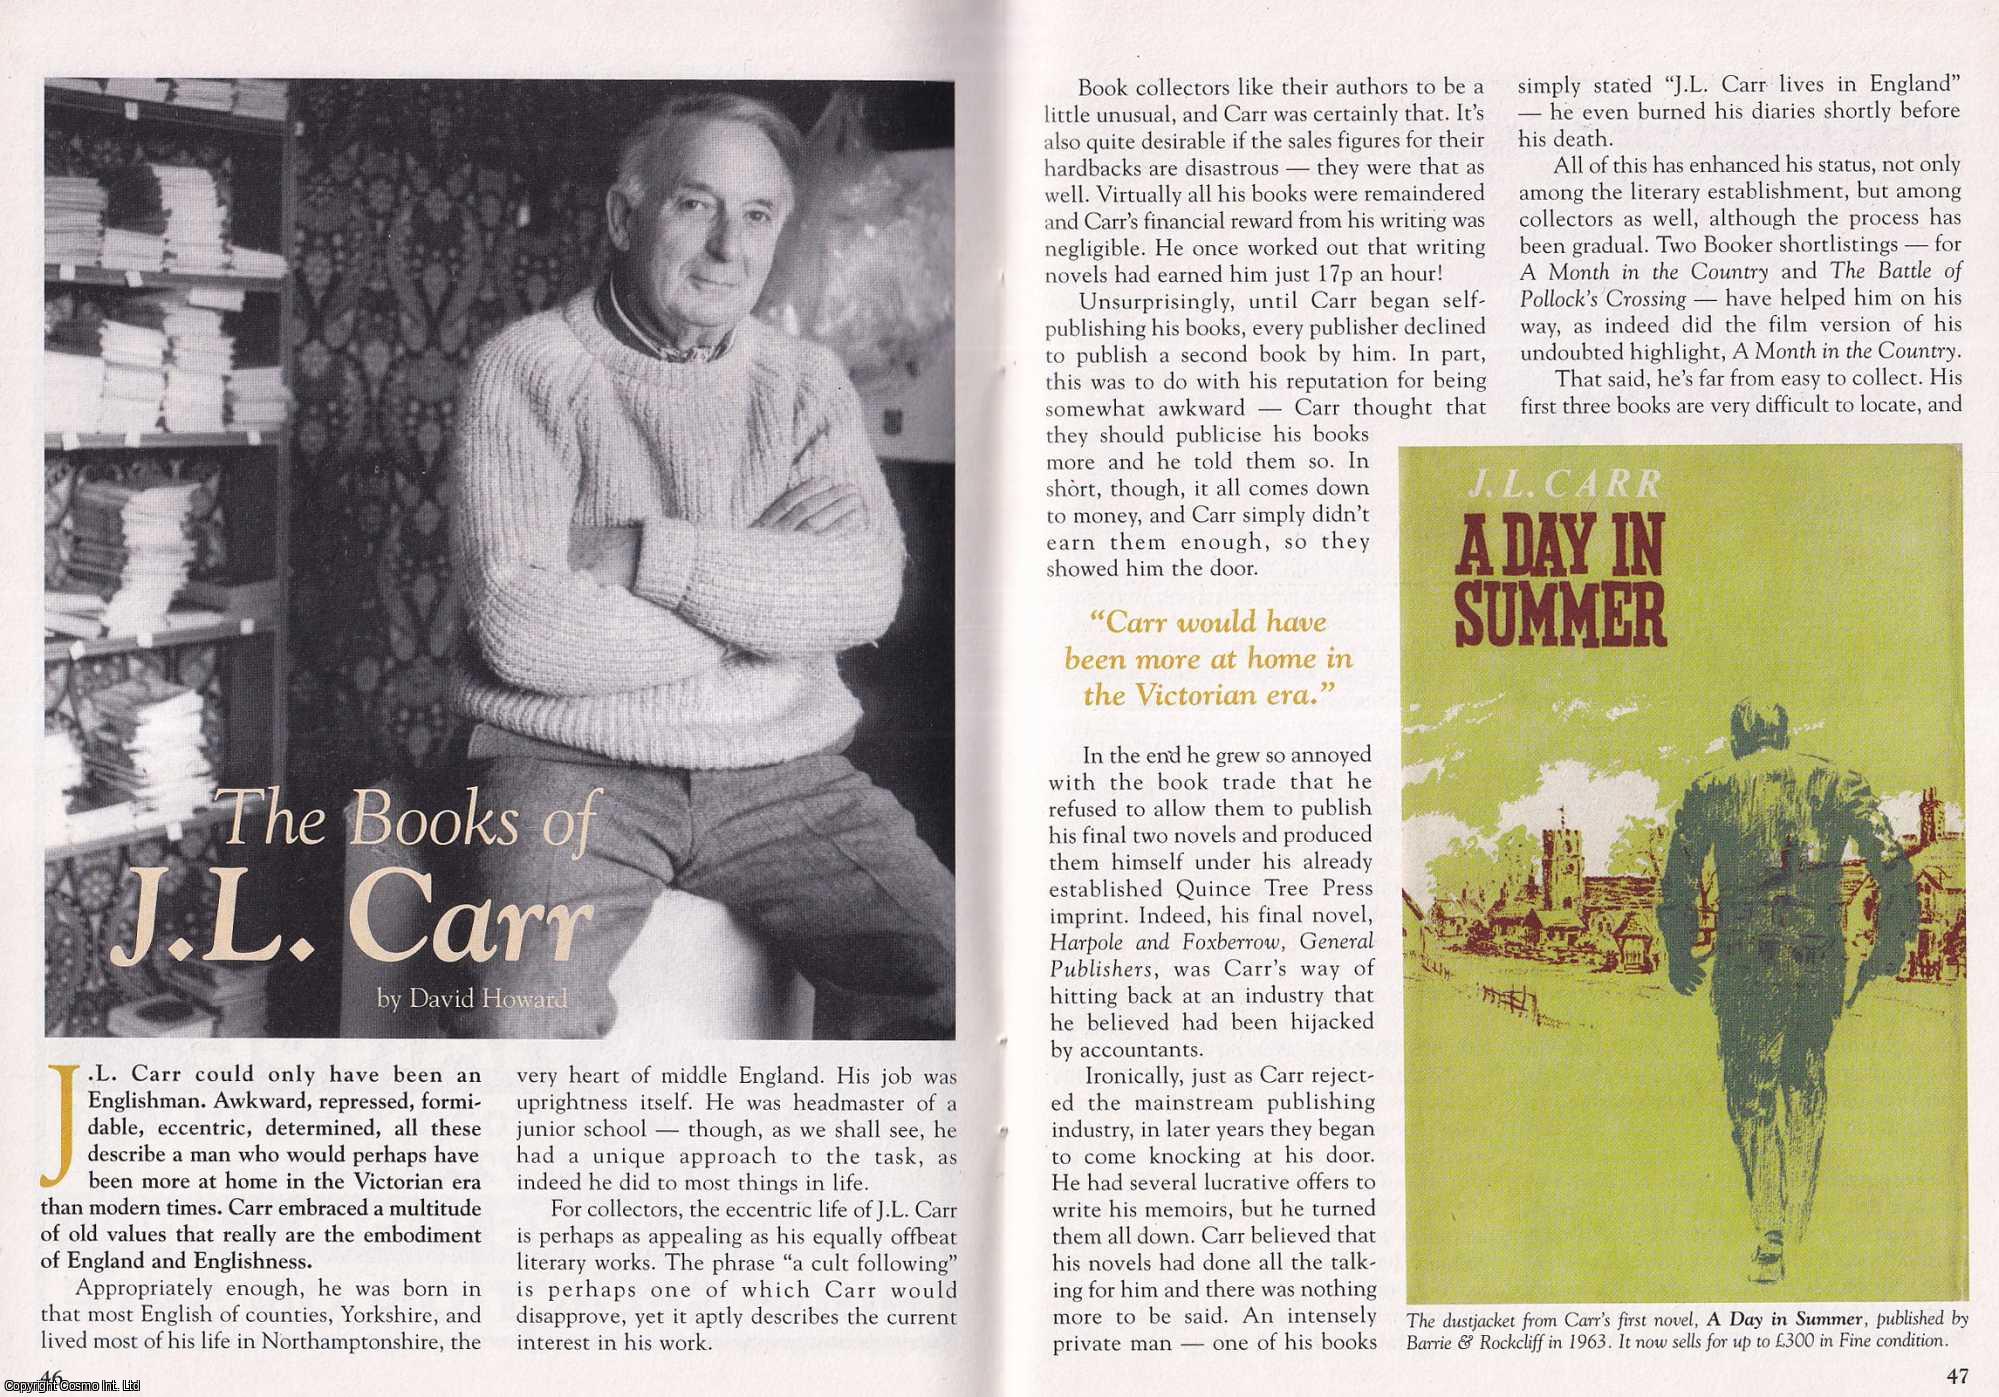 David Howard - The Books of J. L. Carr. This is an original article separated from an issue of The Book & Magazine Collector publication, 2003.